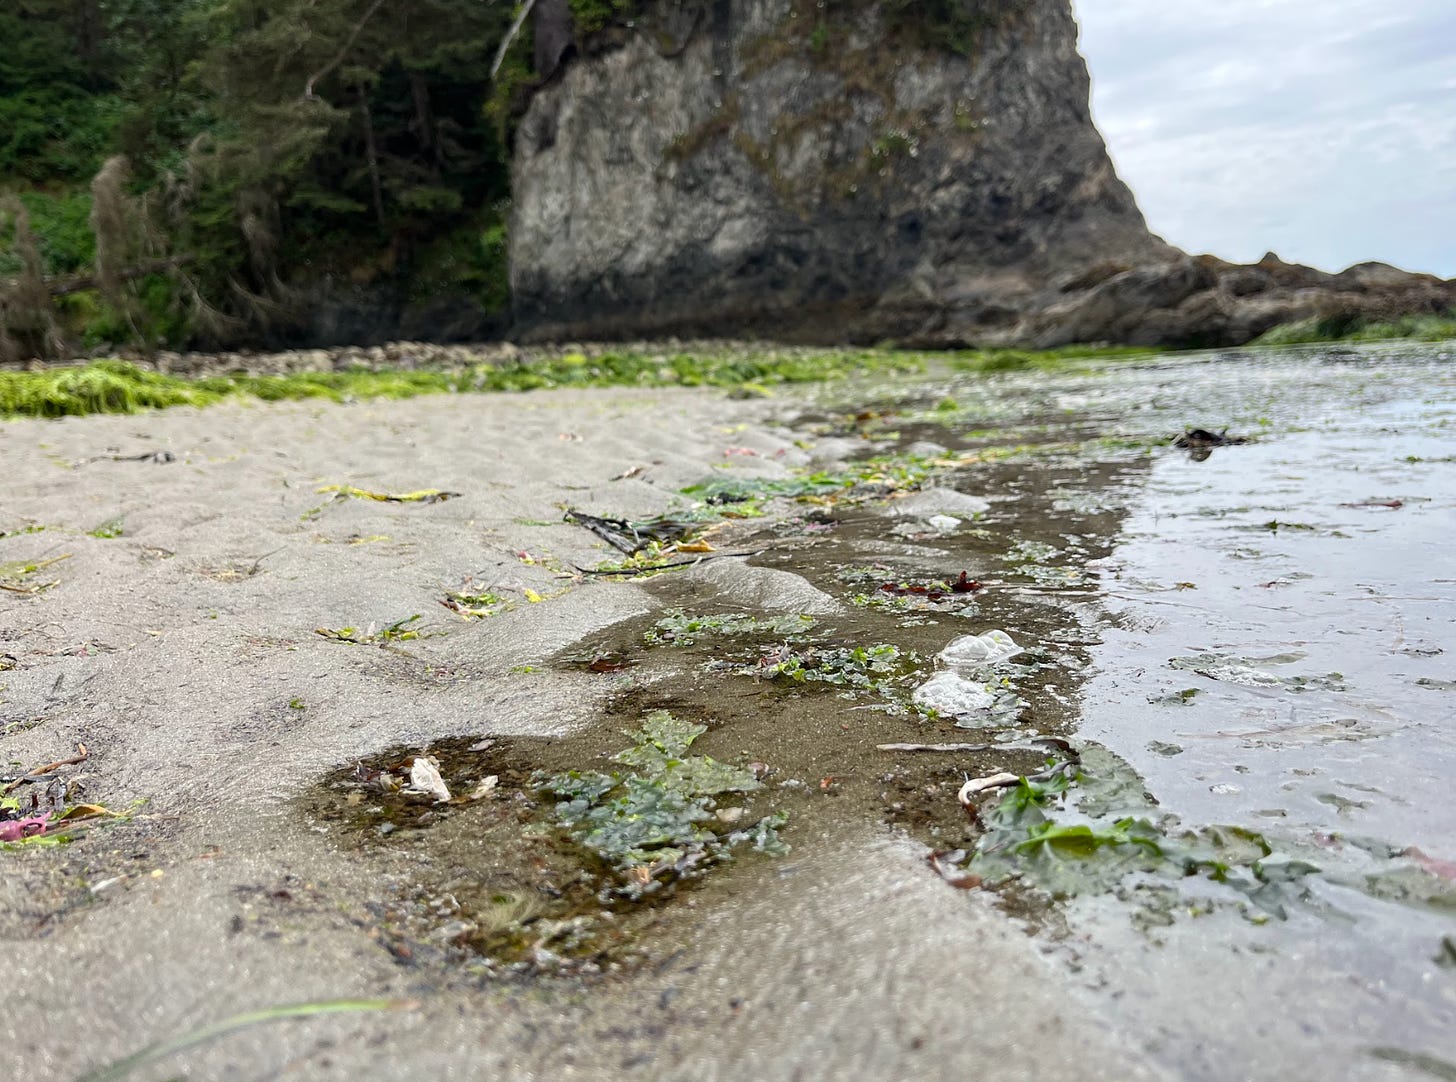 Close-up photo of water in sand, seaweed on beach in background.